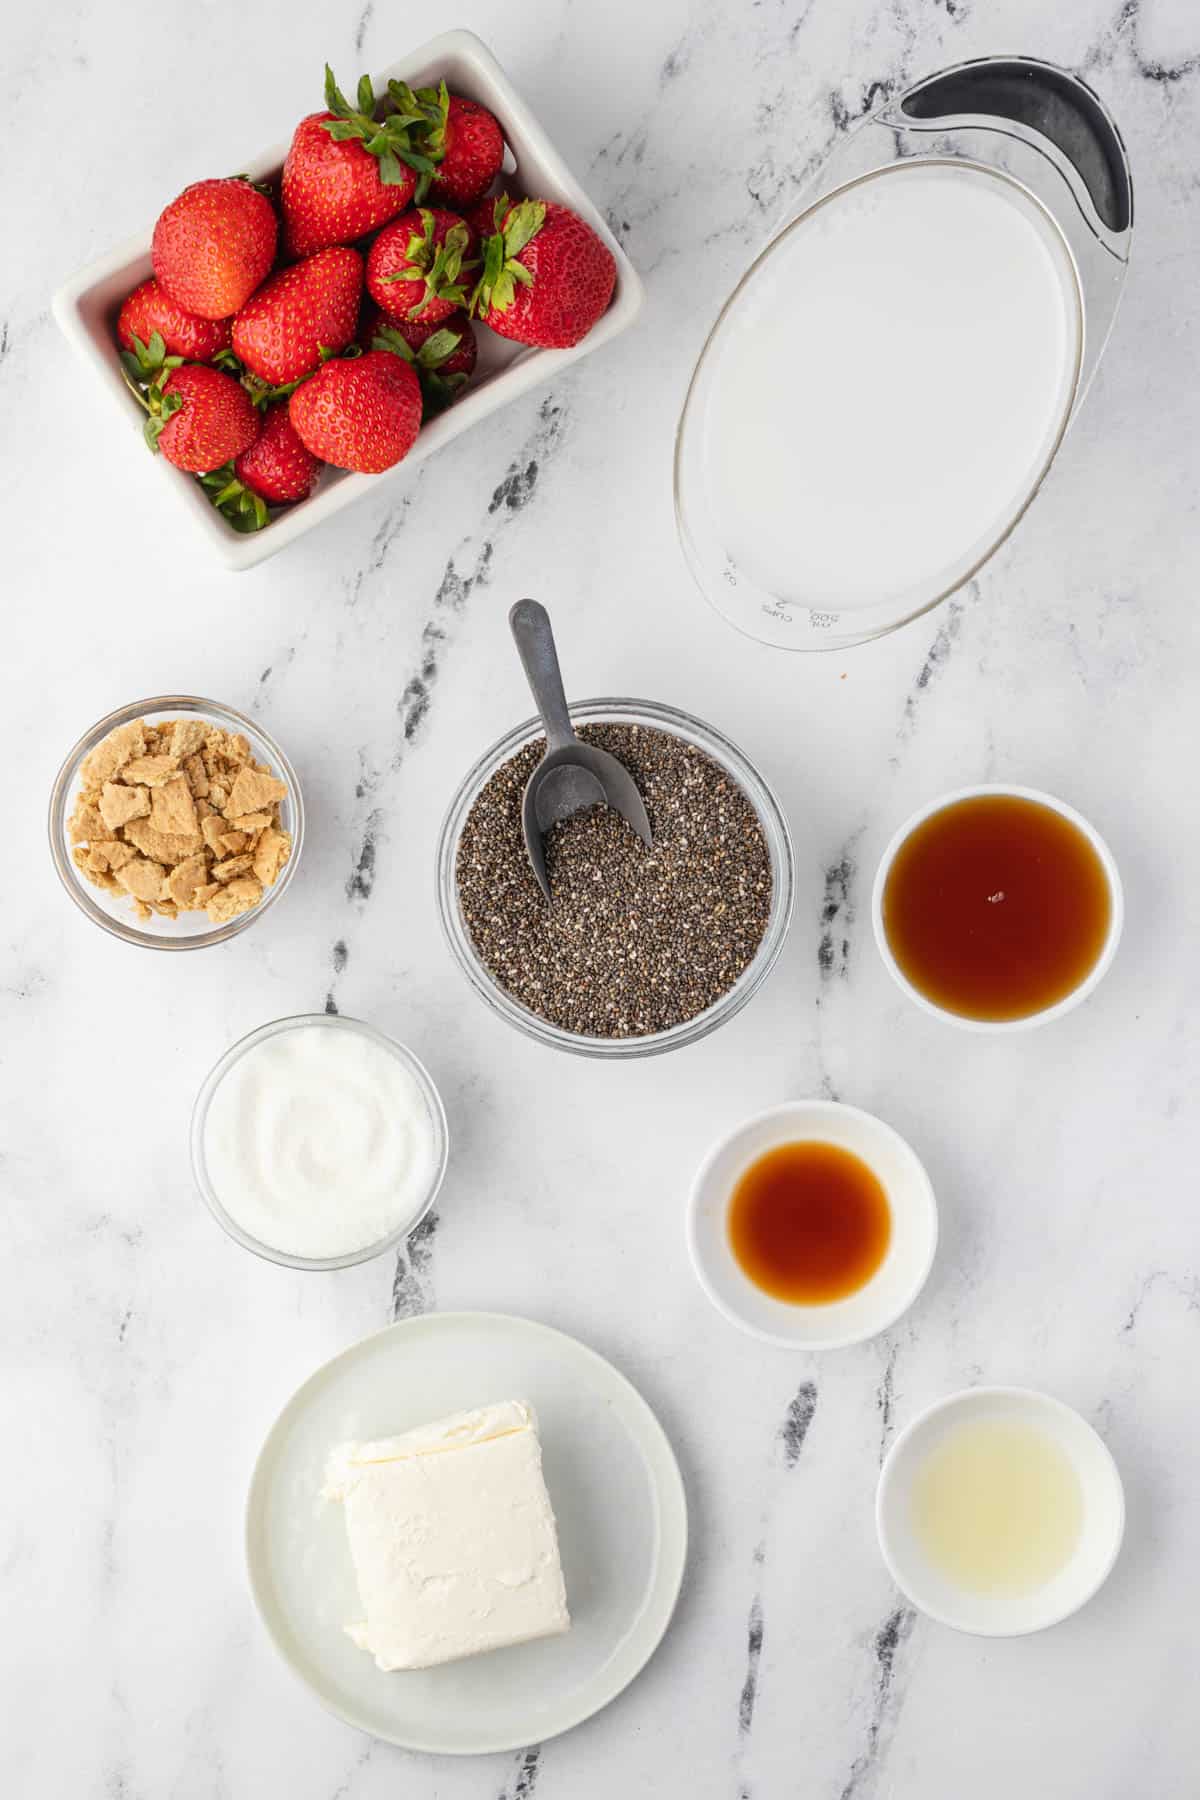 Ingredients for making strawberry cheesecake chia pudding in individual bowls.